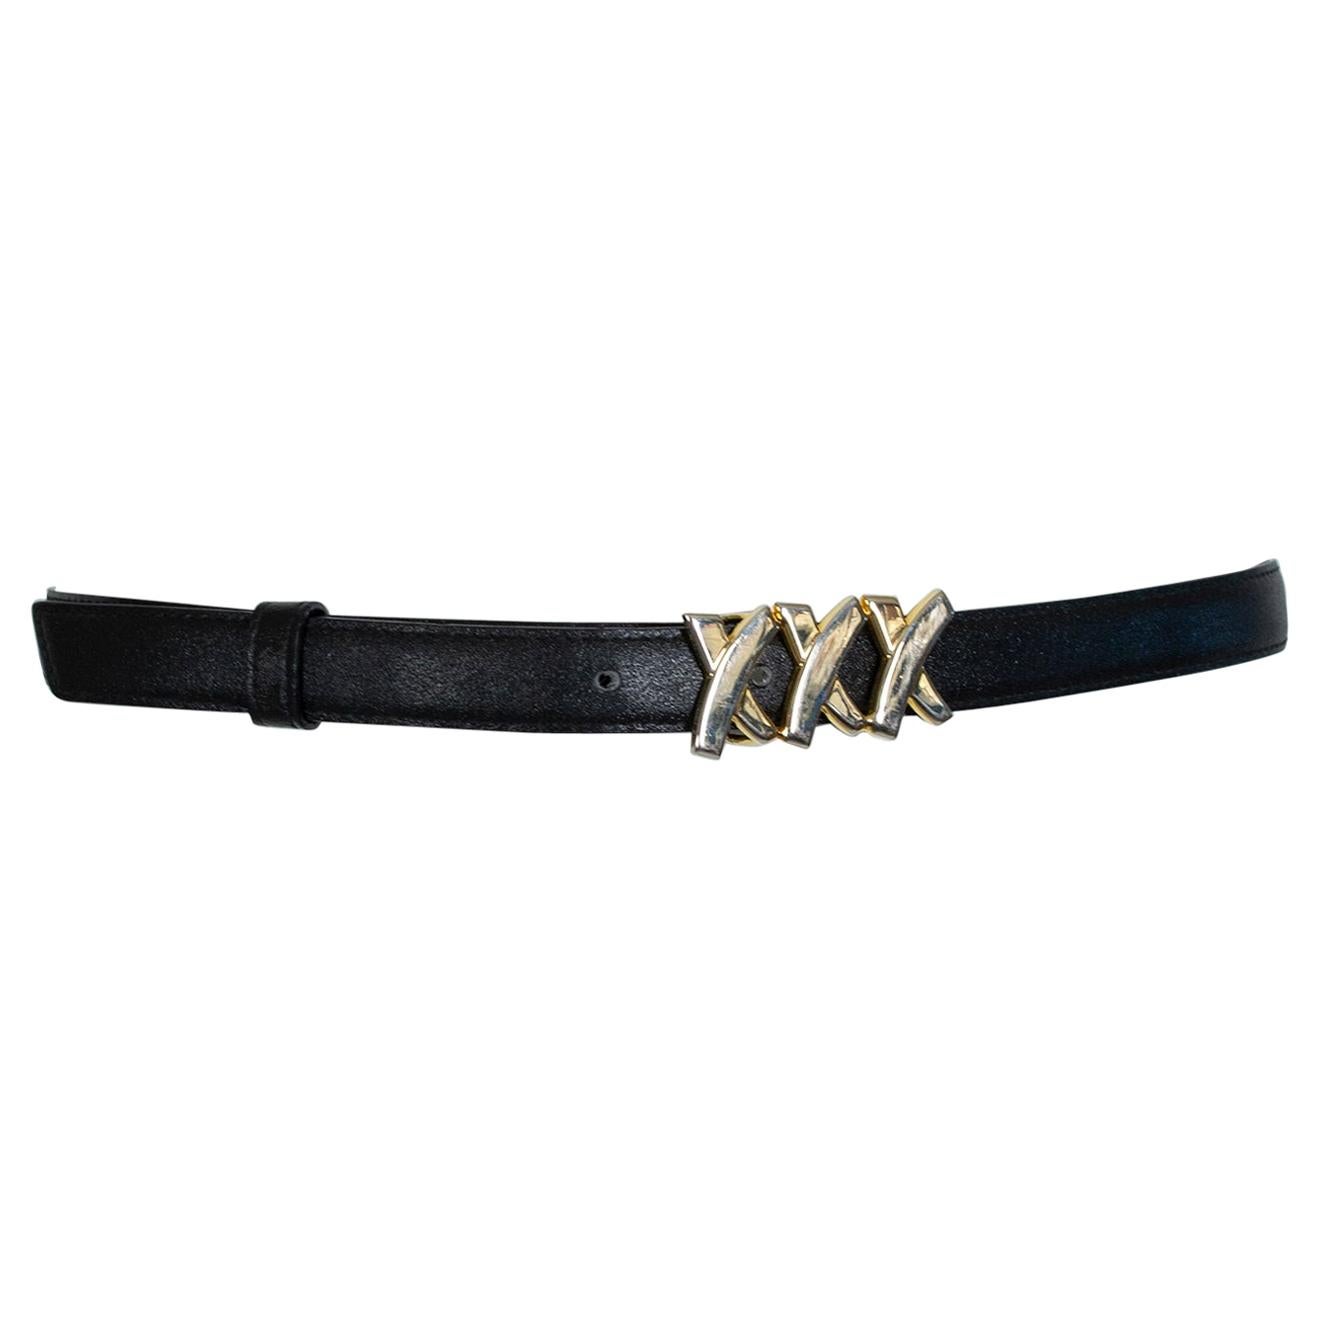 Paloma Picasso Black Leather Triple X Kiss Belt with Gold Hardware – M, 1980s